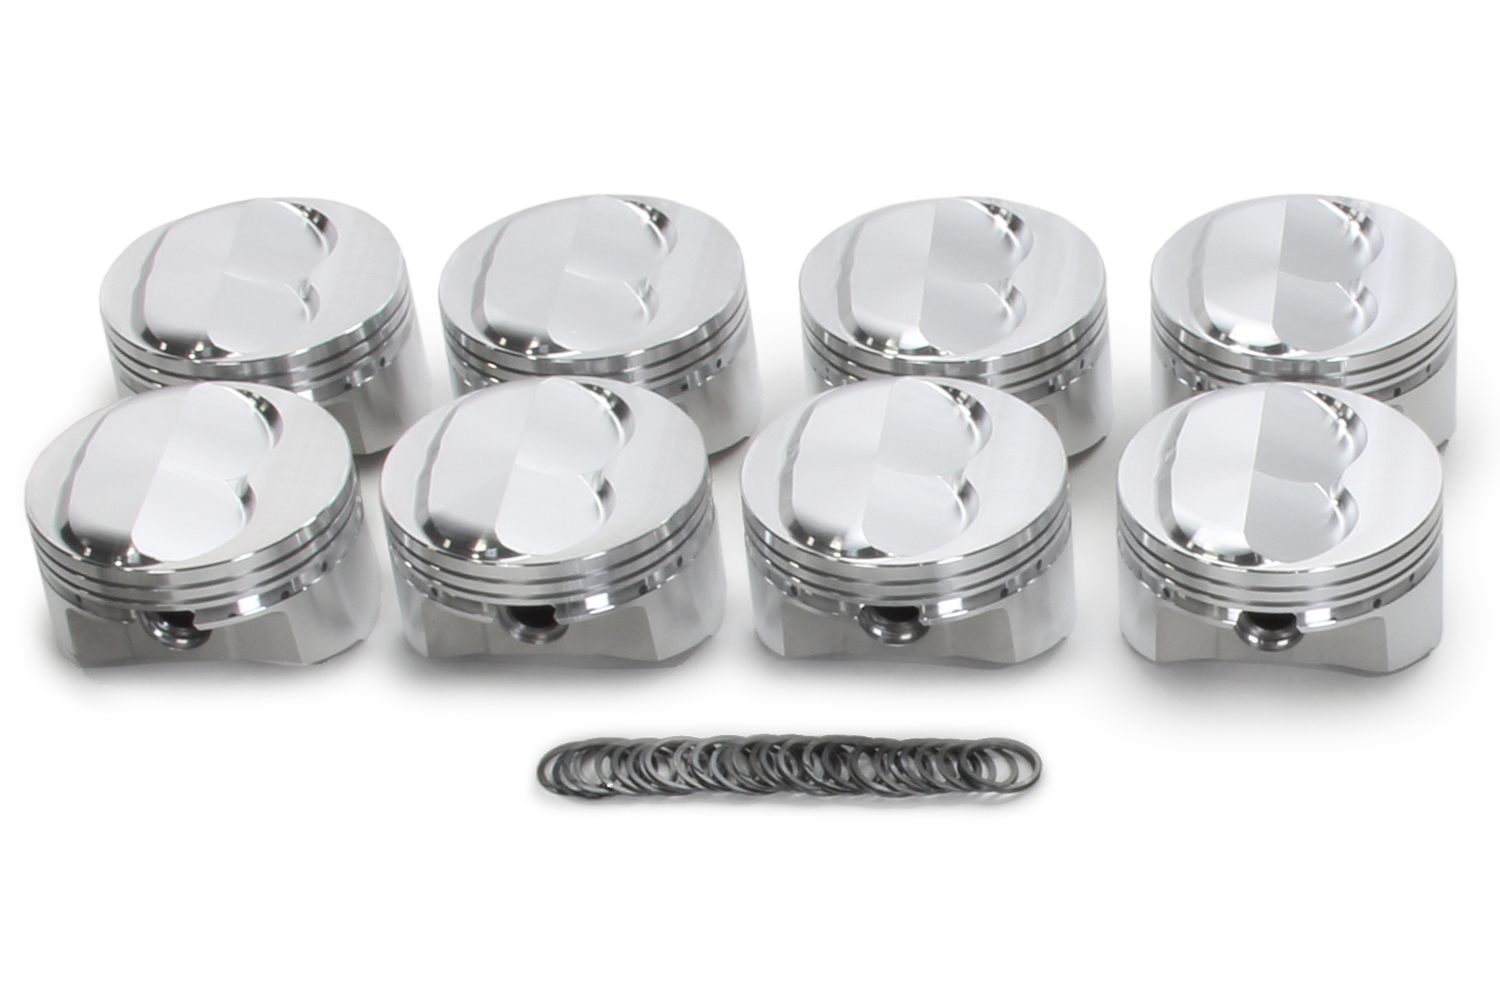 SRP Pistons 142024 Piston, 400 Dome, Forged, 4.155 in Bore, 1/16 x 1/16 x 3/16 in Ring Grooves, Plus 4.00 cc, Small Block Chevy, Set of 8